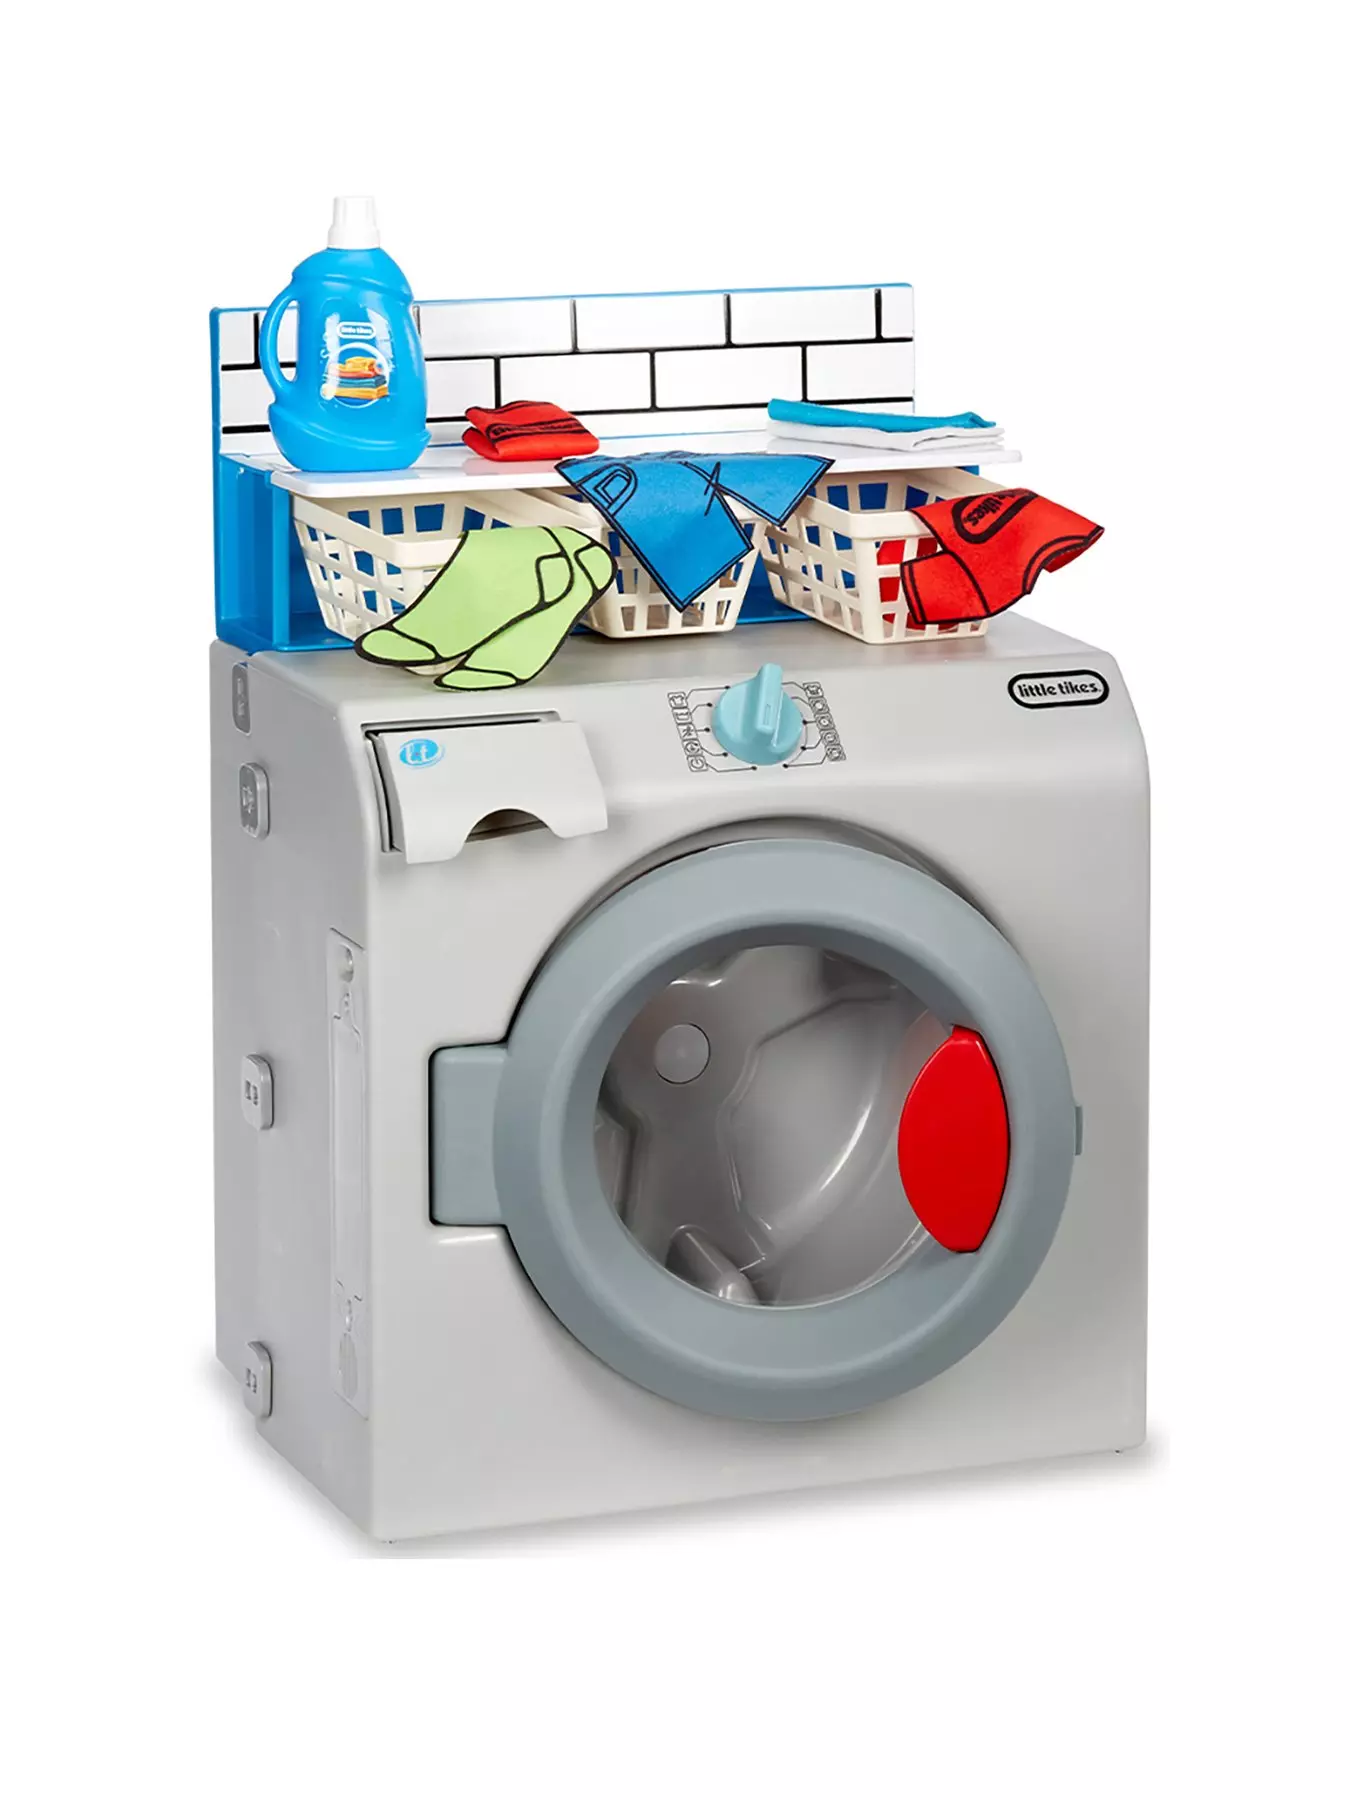 Barbie Ken Doll with Spinning Washer/Dryer Laundry-Themed Doll Playset -  Walmart.com